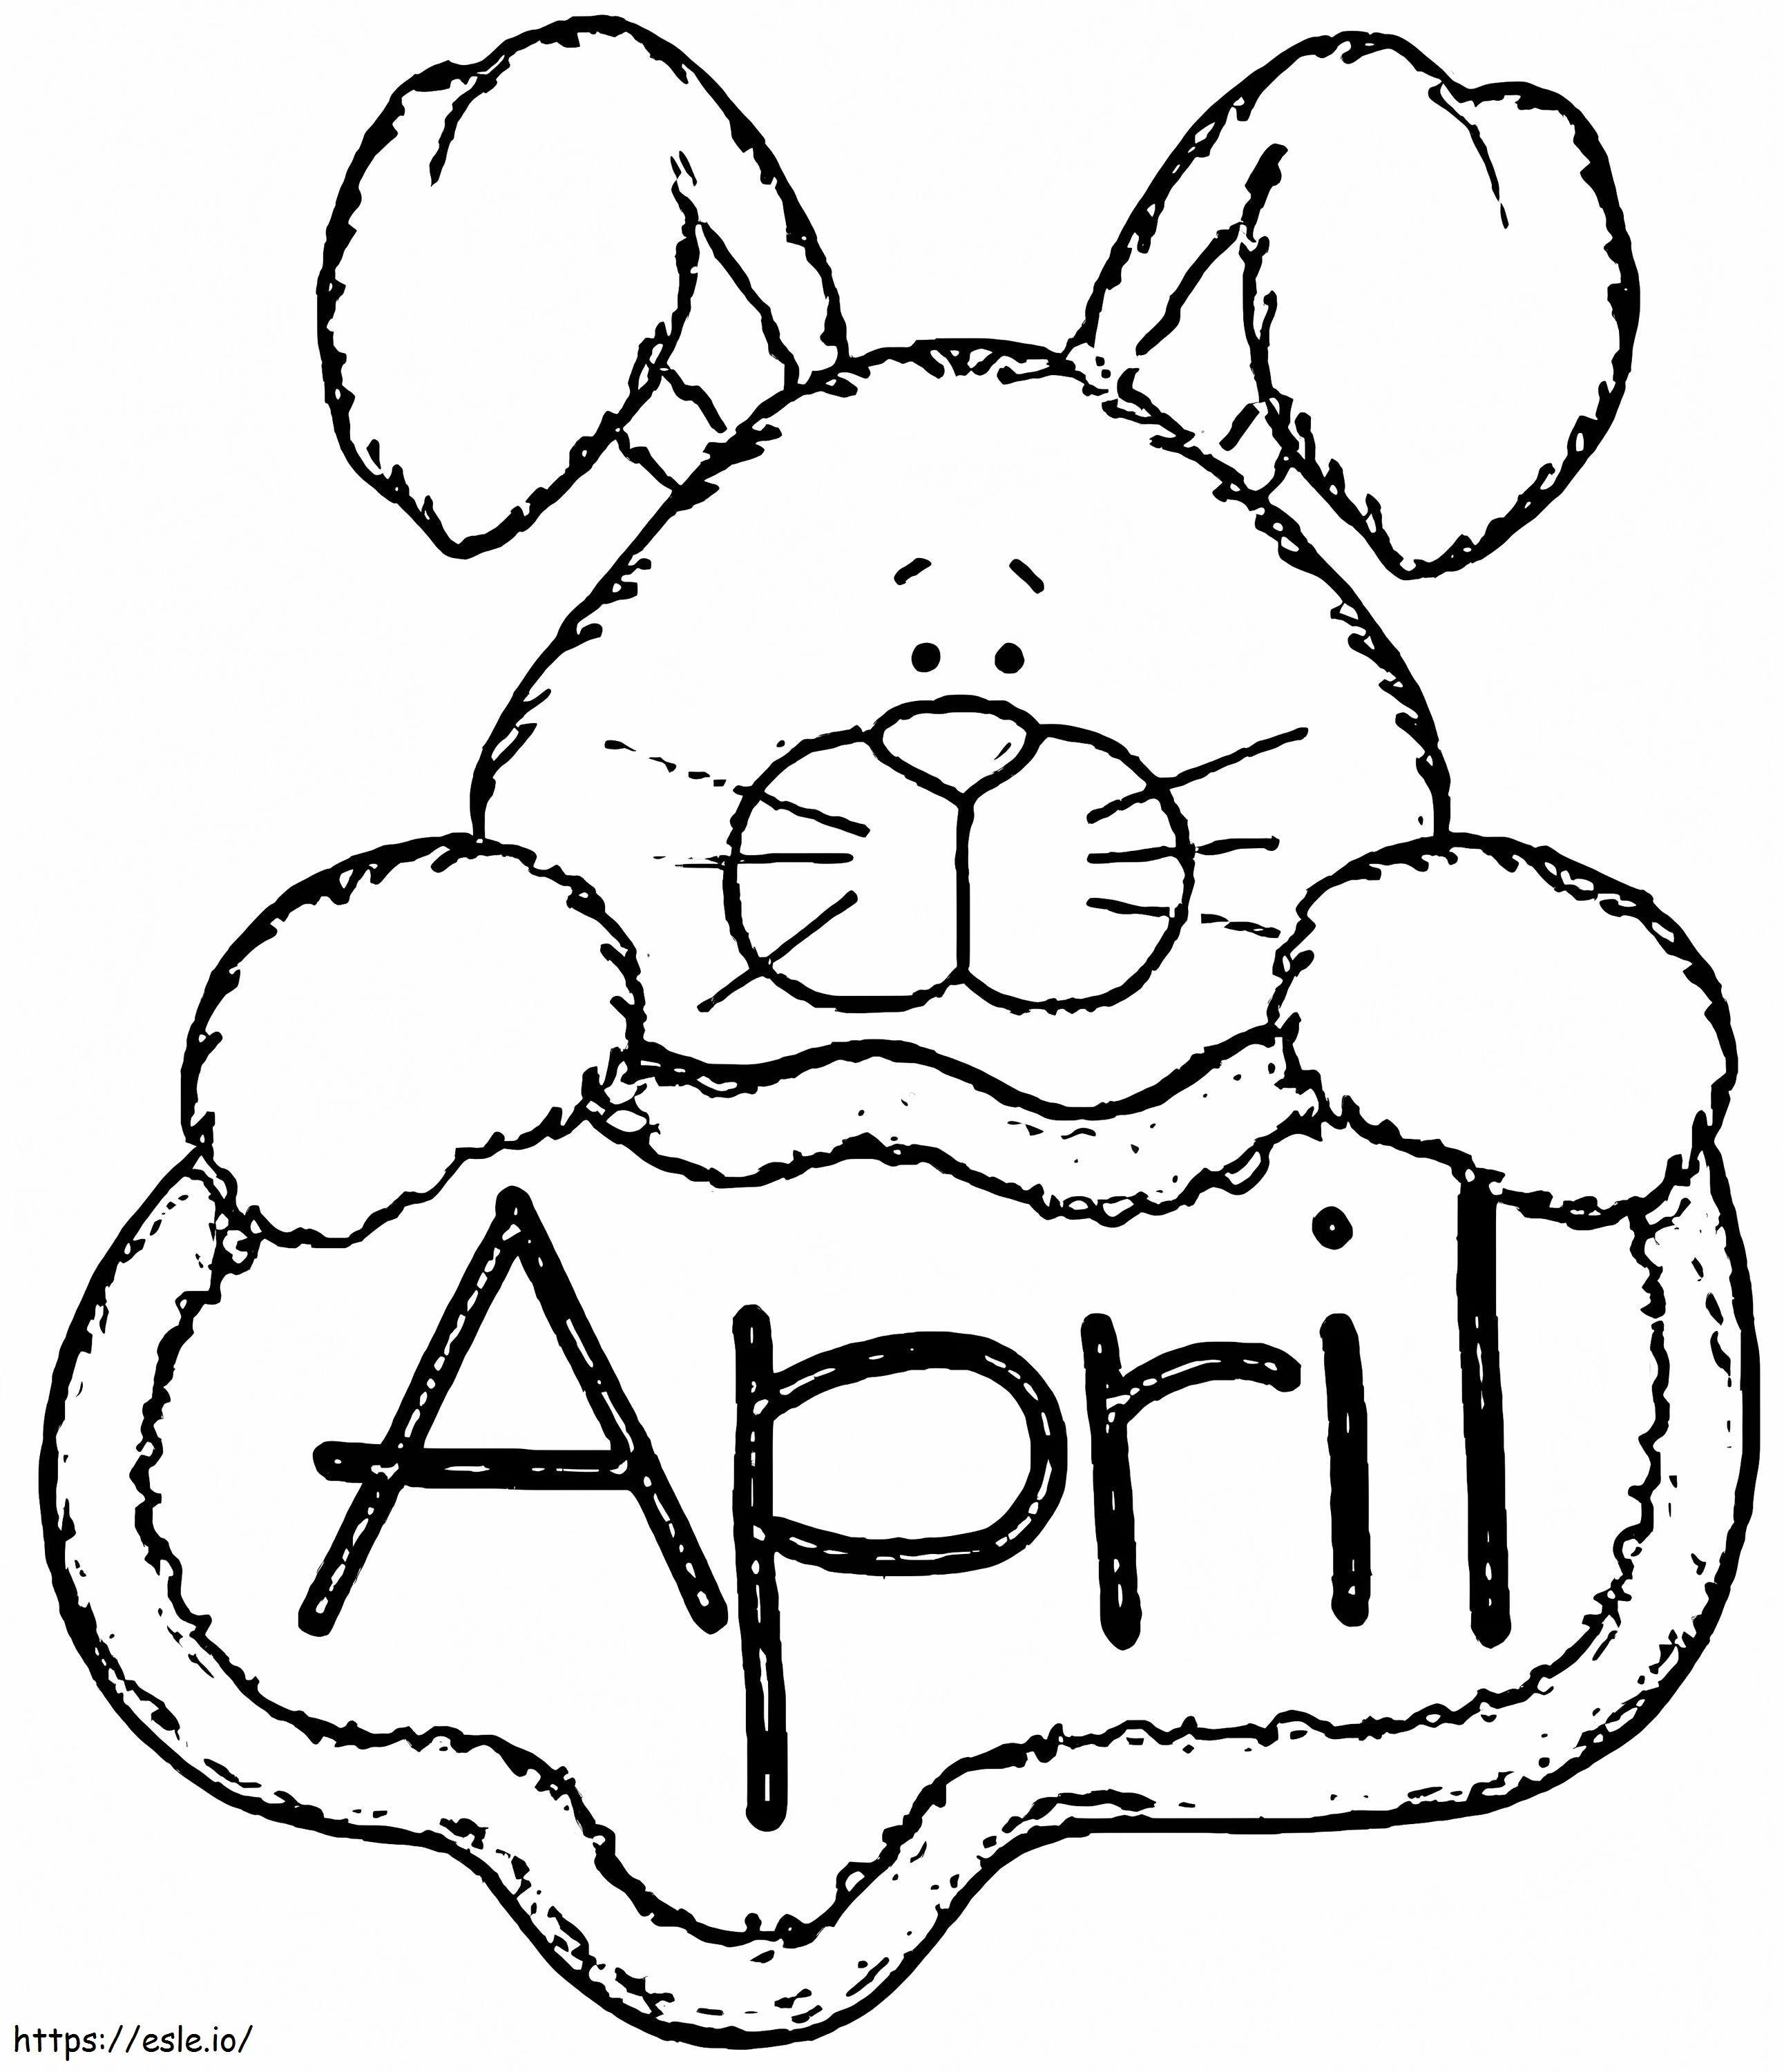 April 9Th coloring page